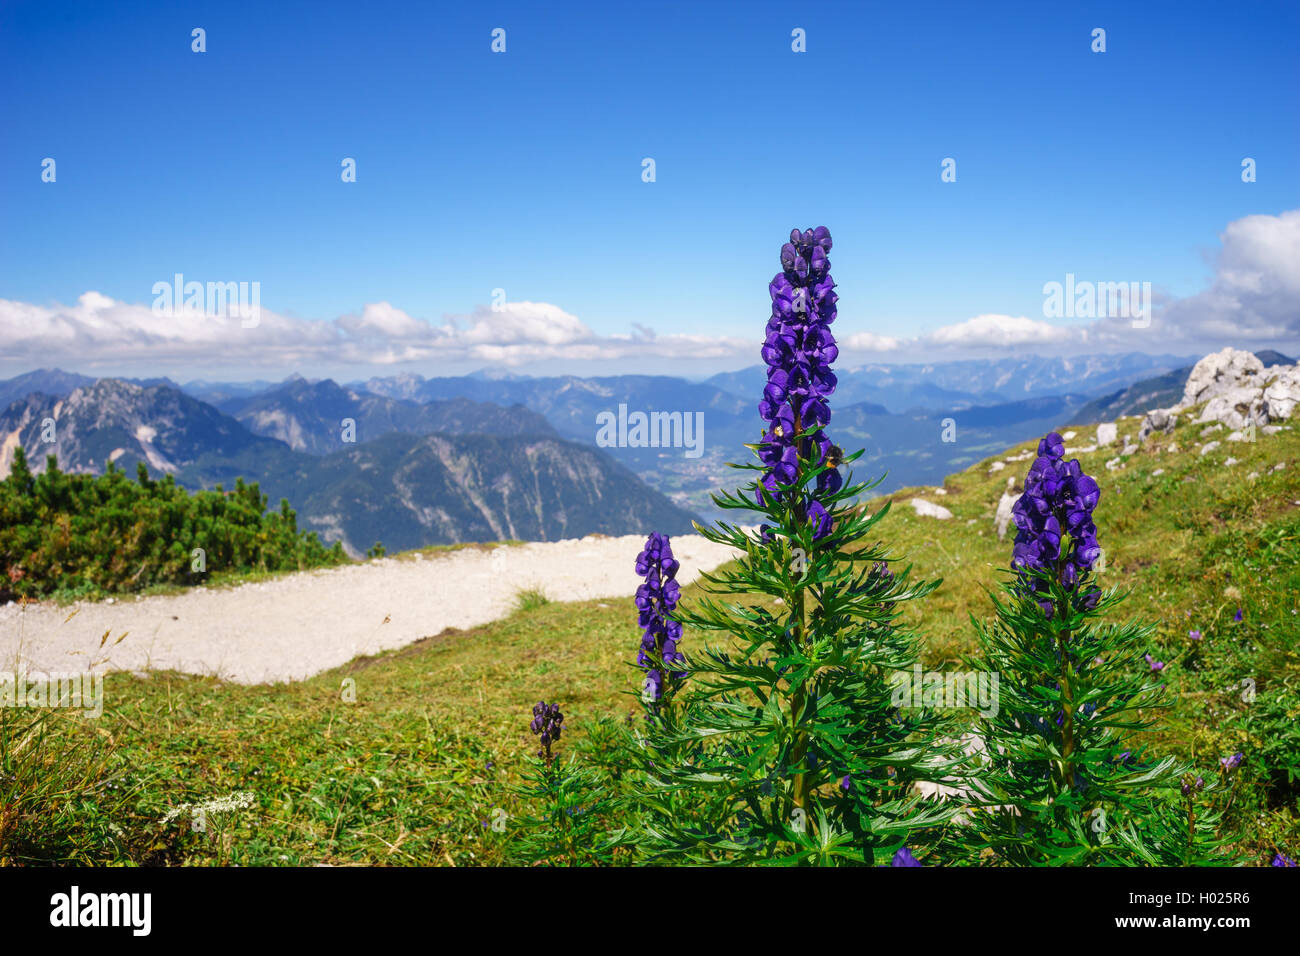 Aconitum napellus or monk's-hood or wolfsbane flowers against alpine mountains Stock Photo